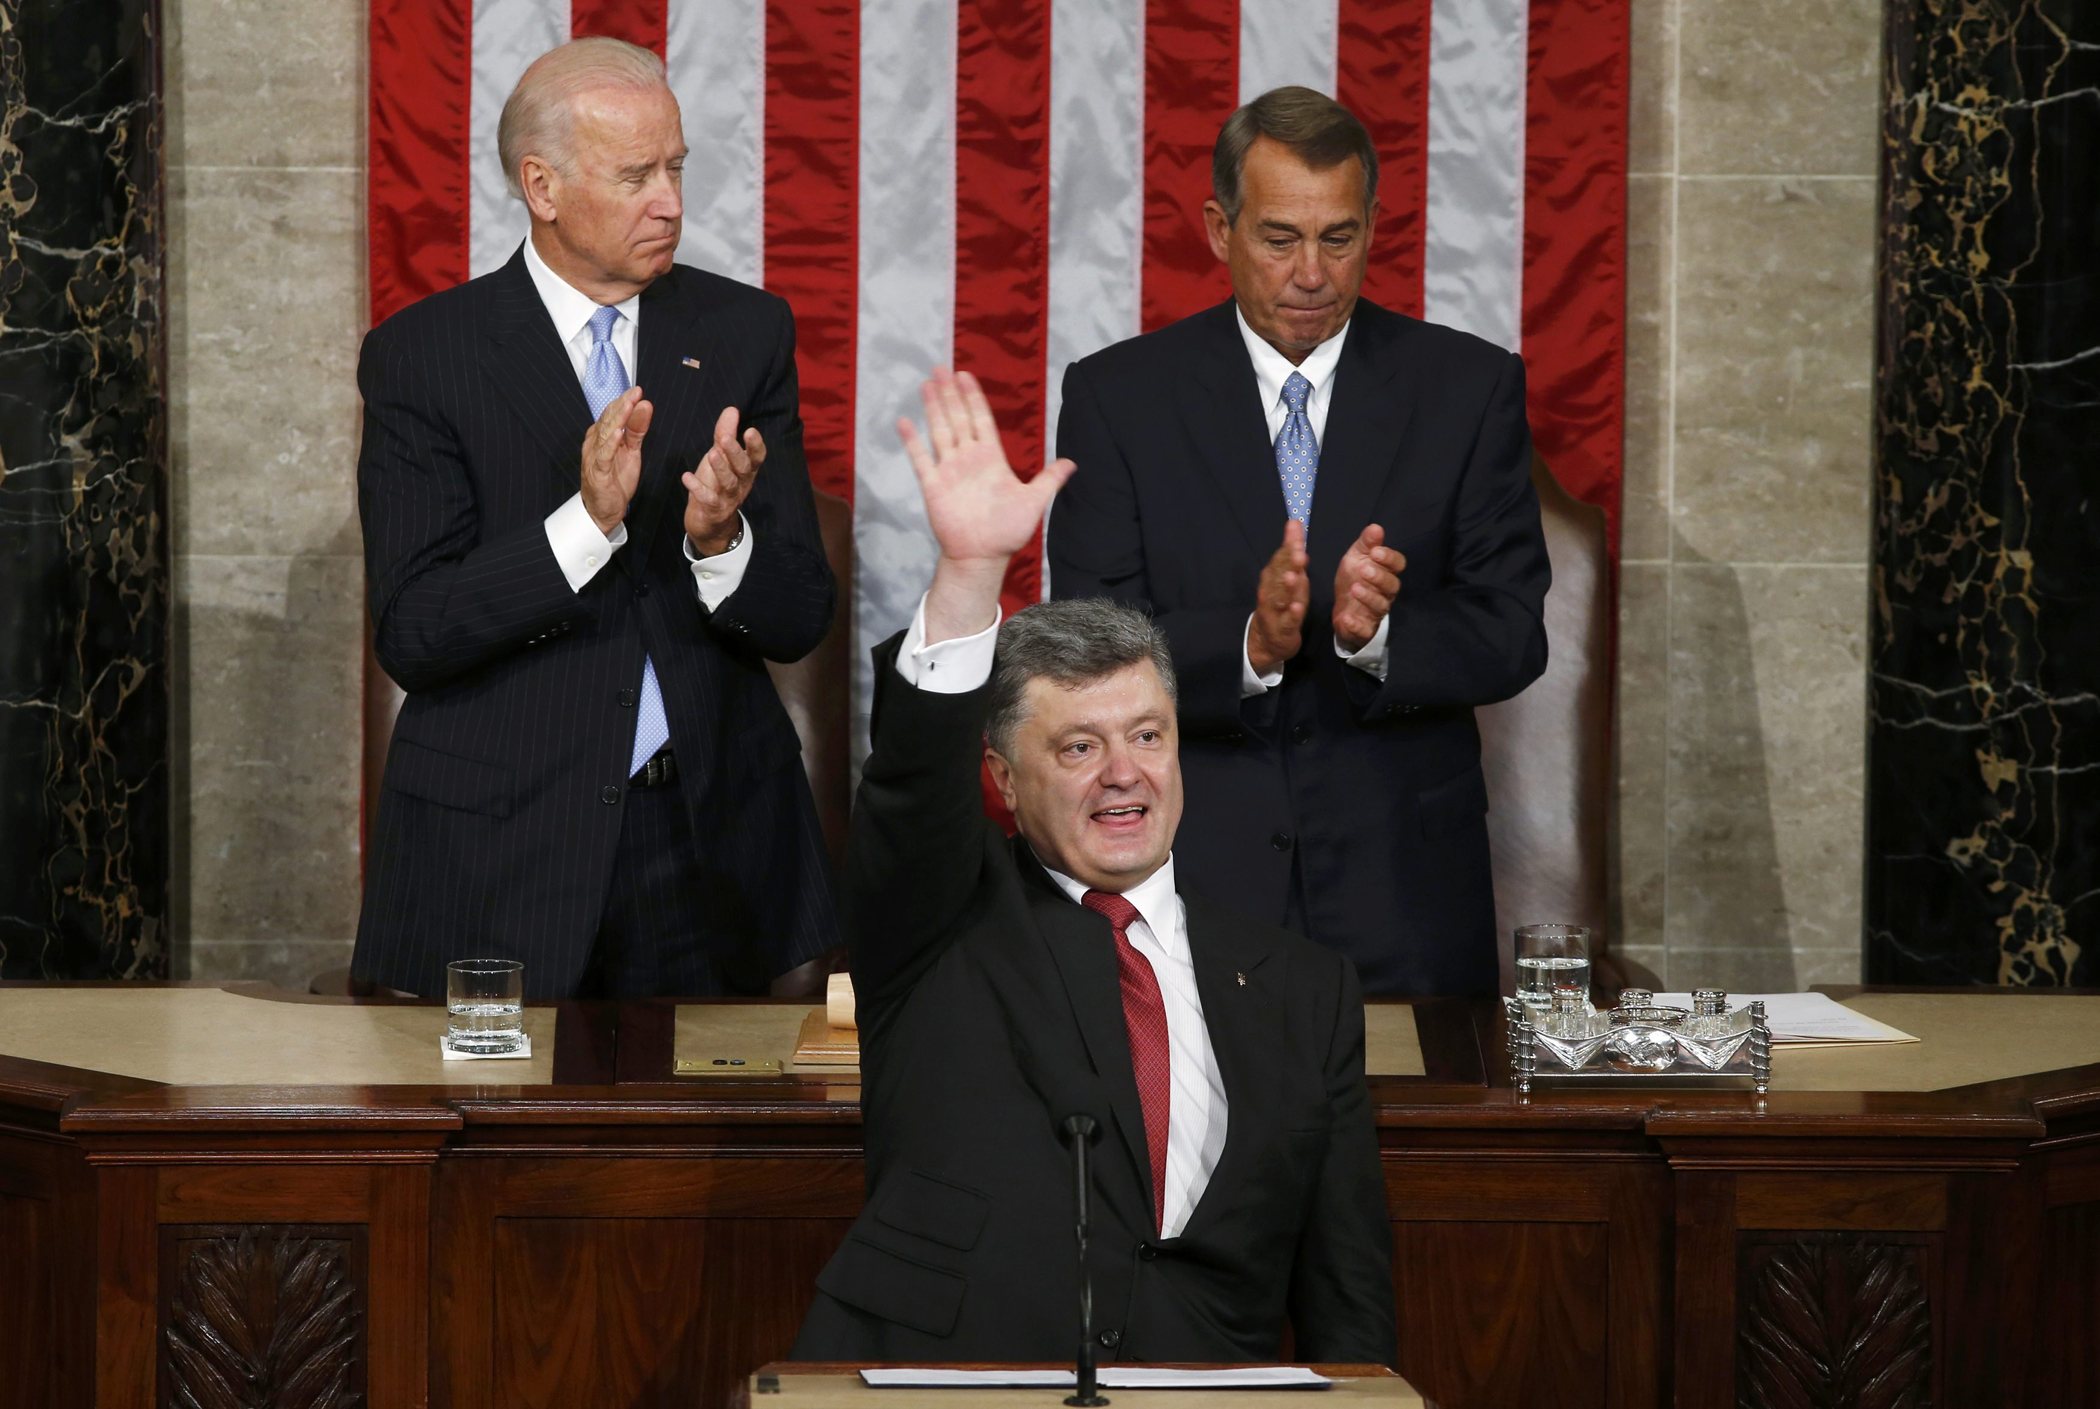 Ukraine President Poroshenko acknowledges applause after addressing joint meeting of Congress in the U.S. Capitol in Washington